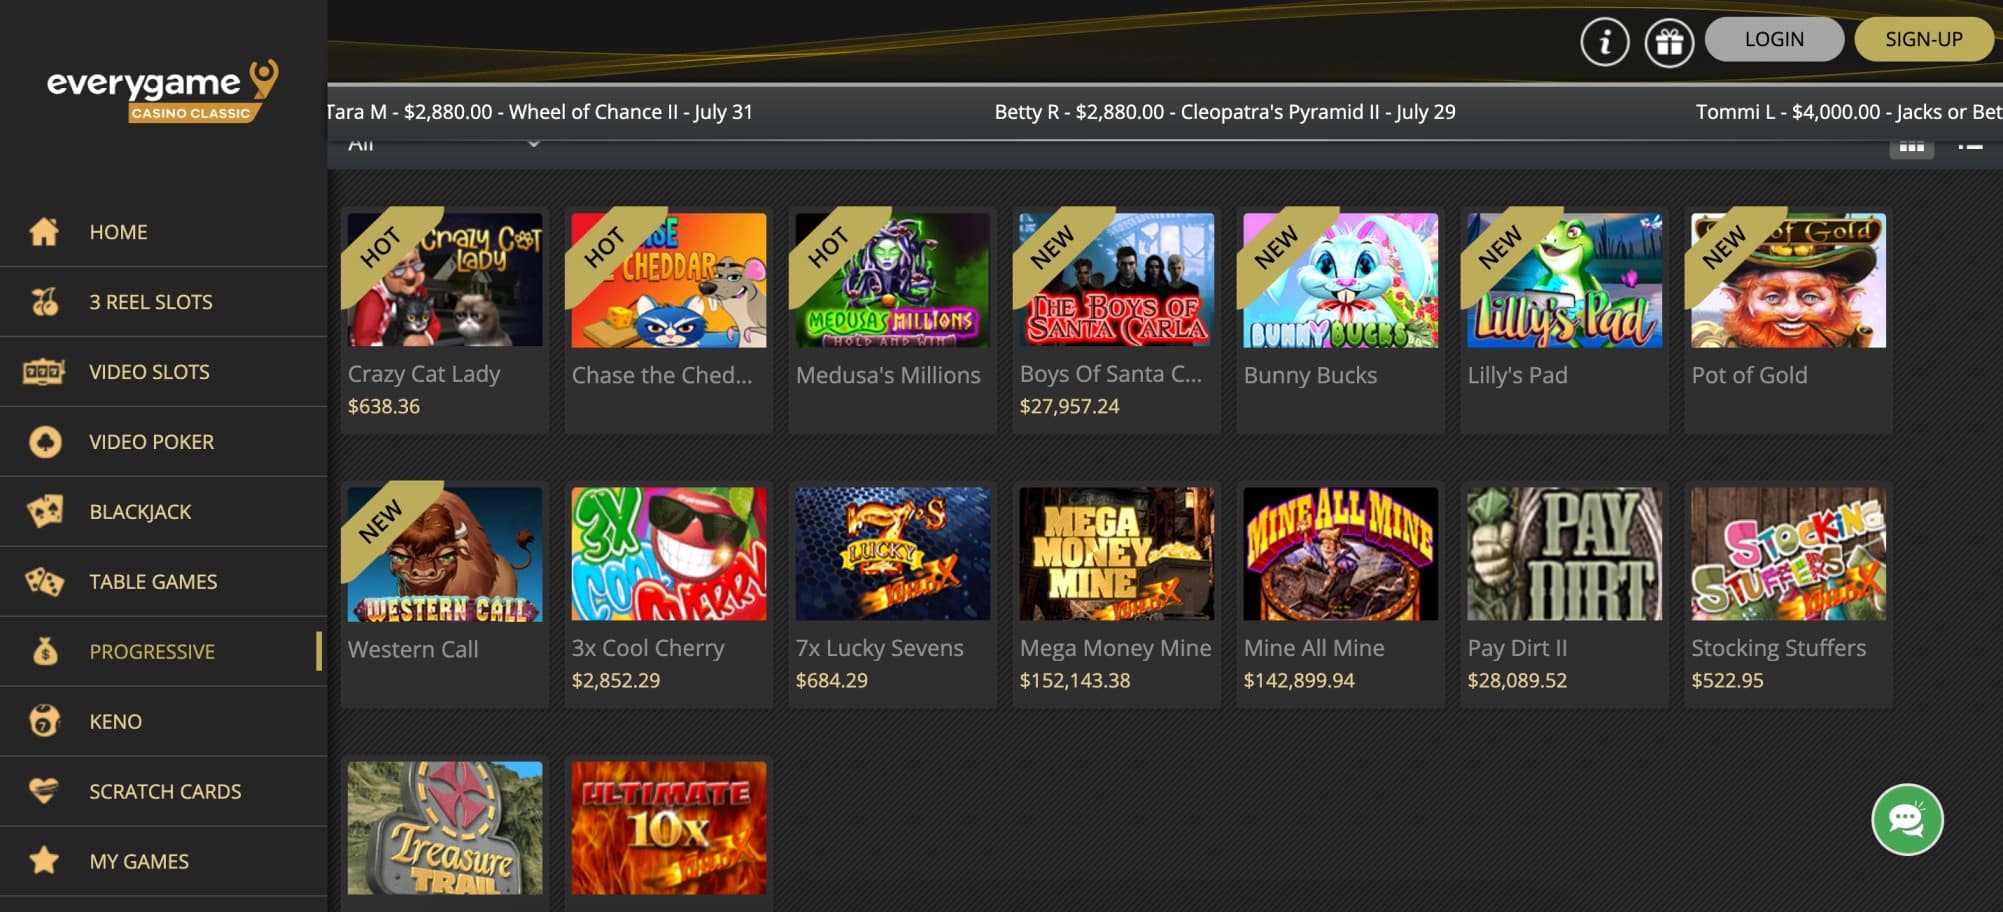 Everygame Casino games offerings